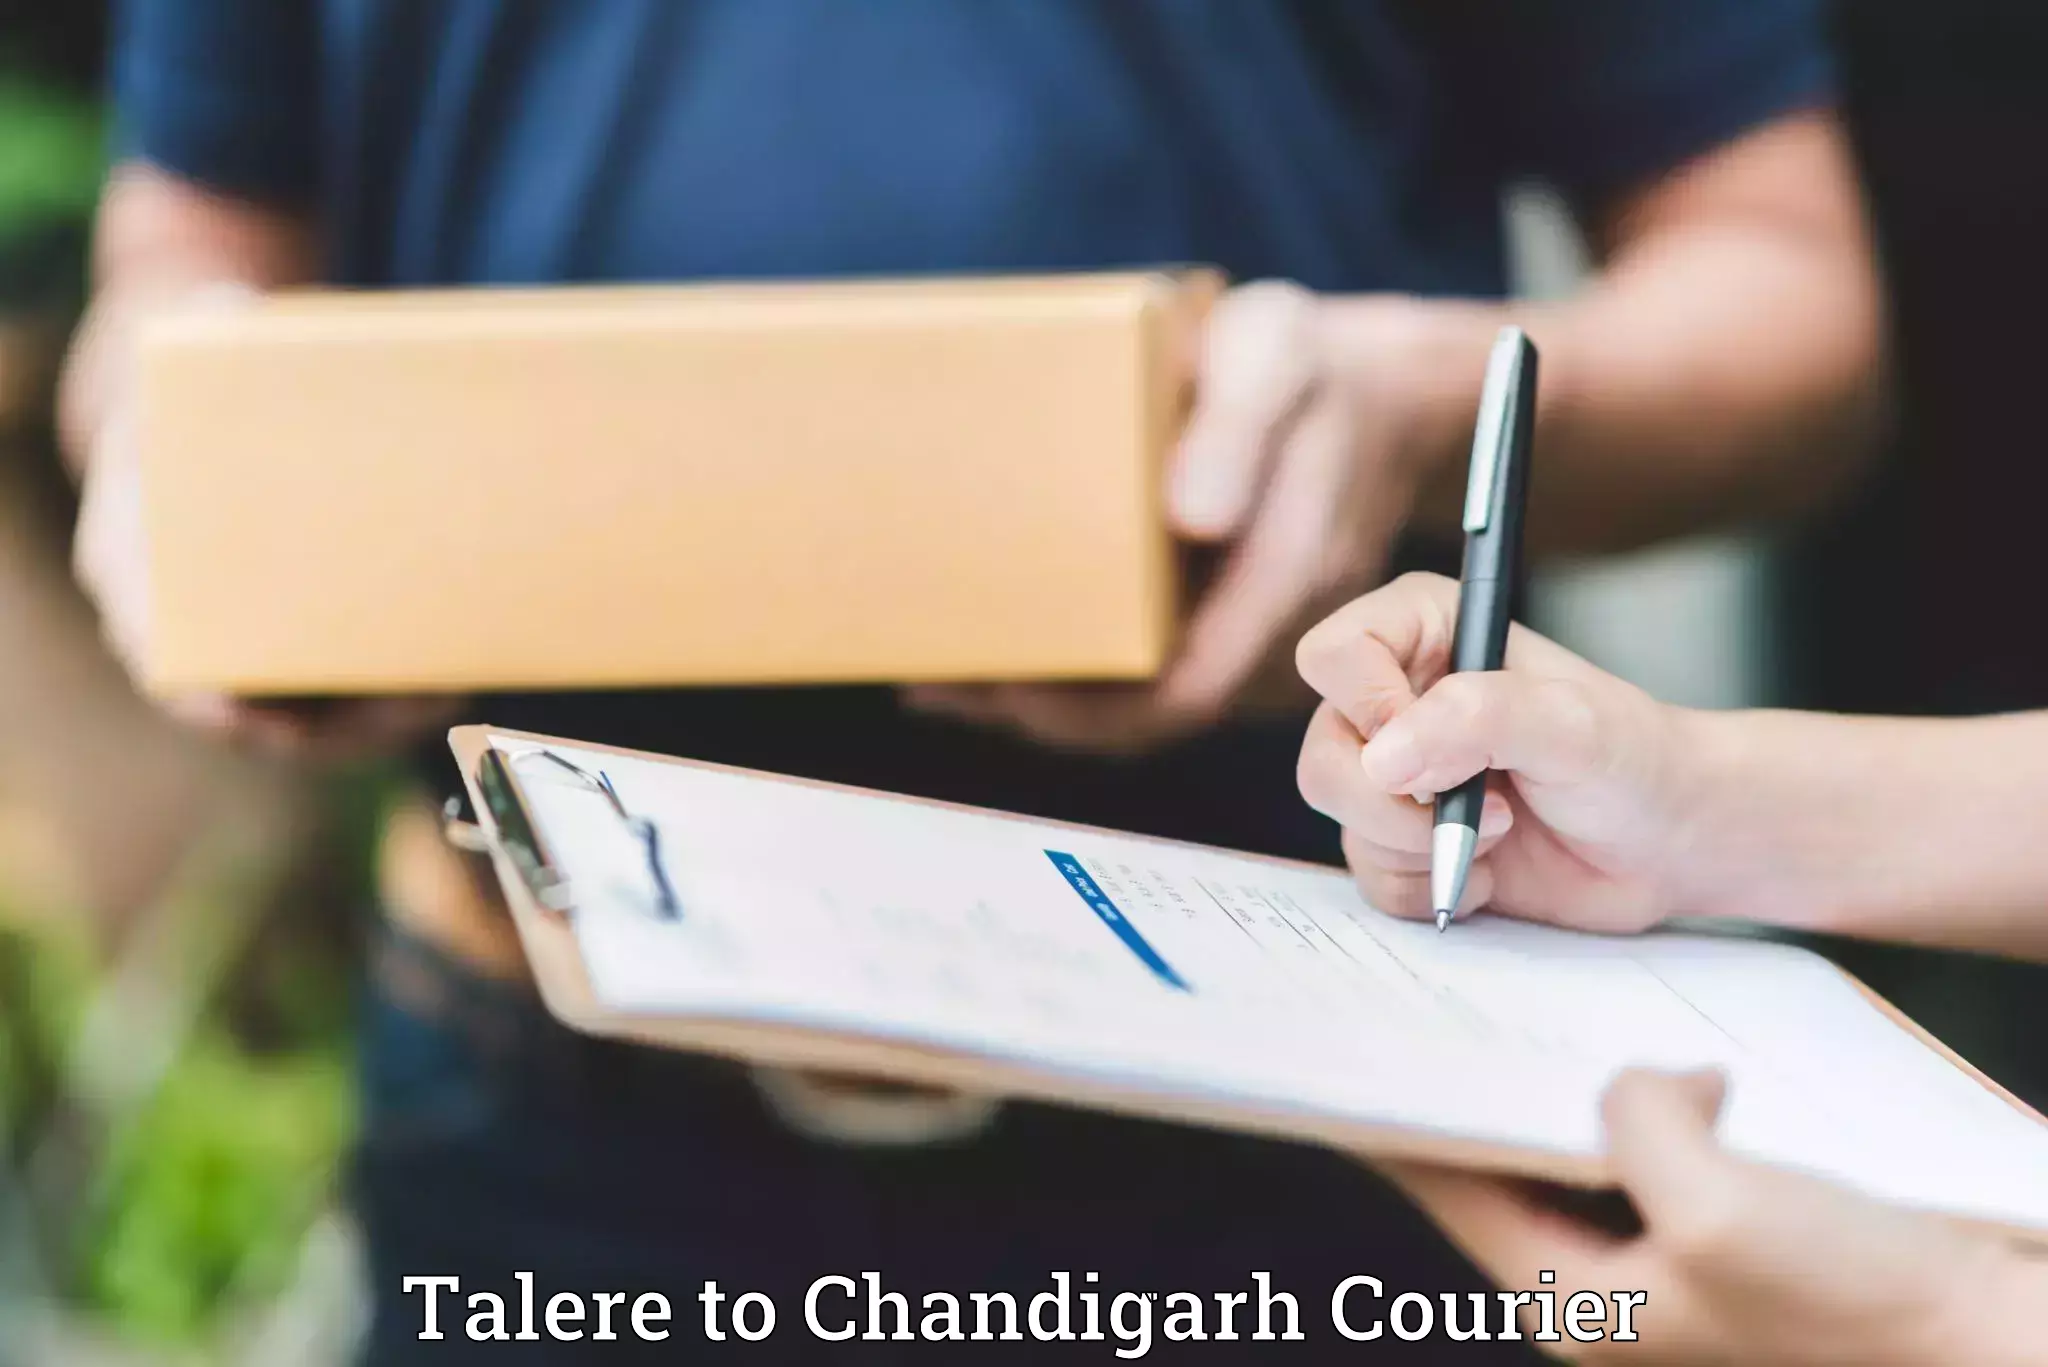 Luggage delivery calculator Talere to Chandigarh